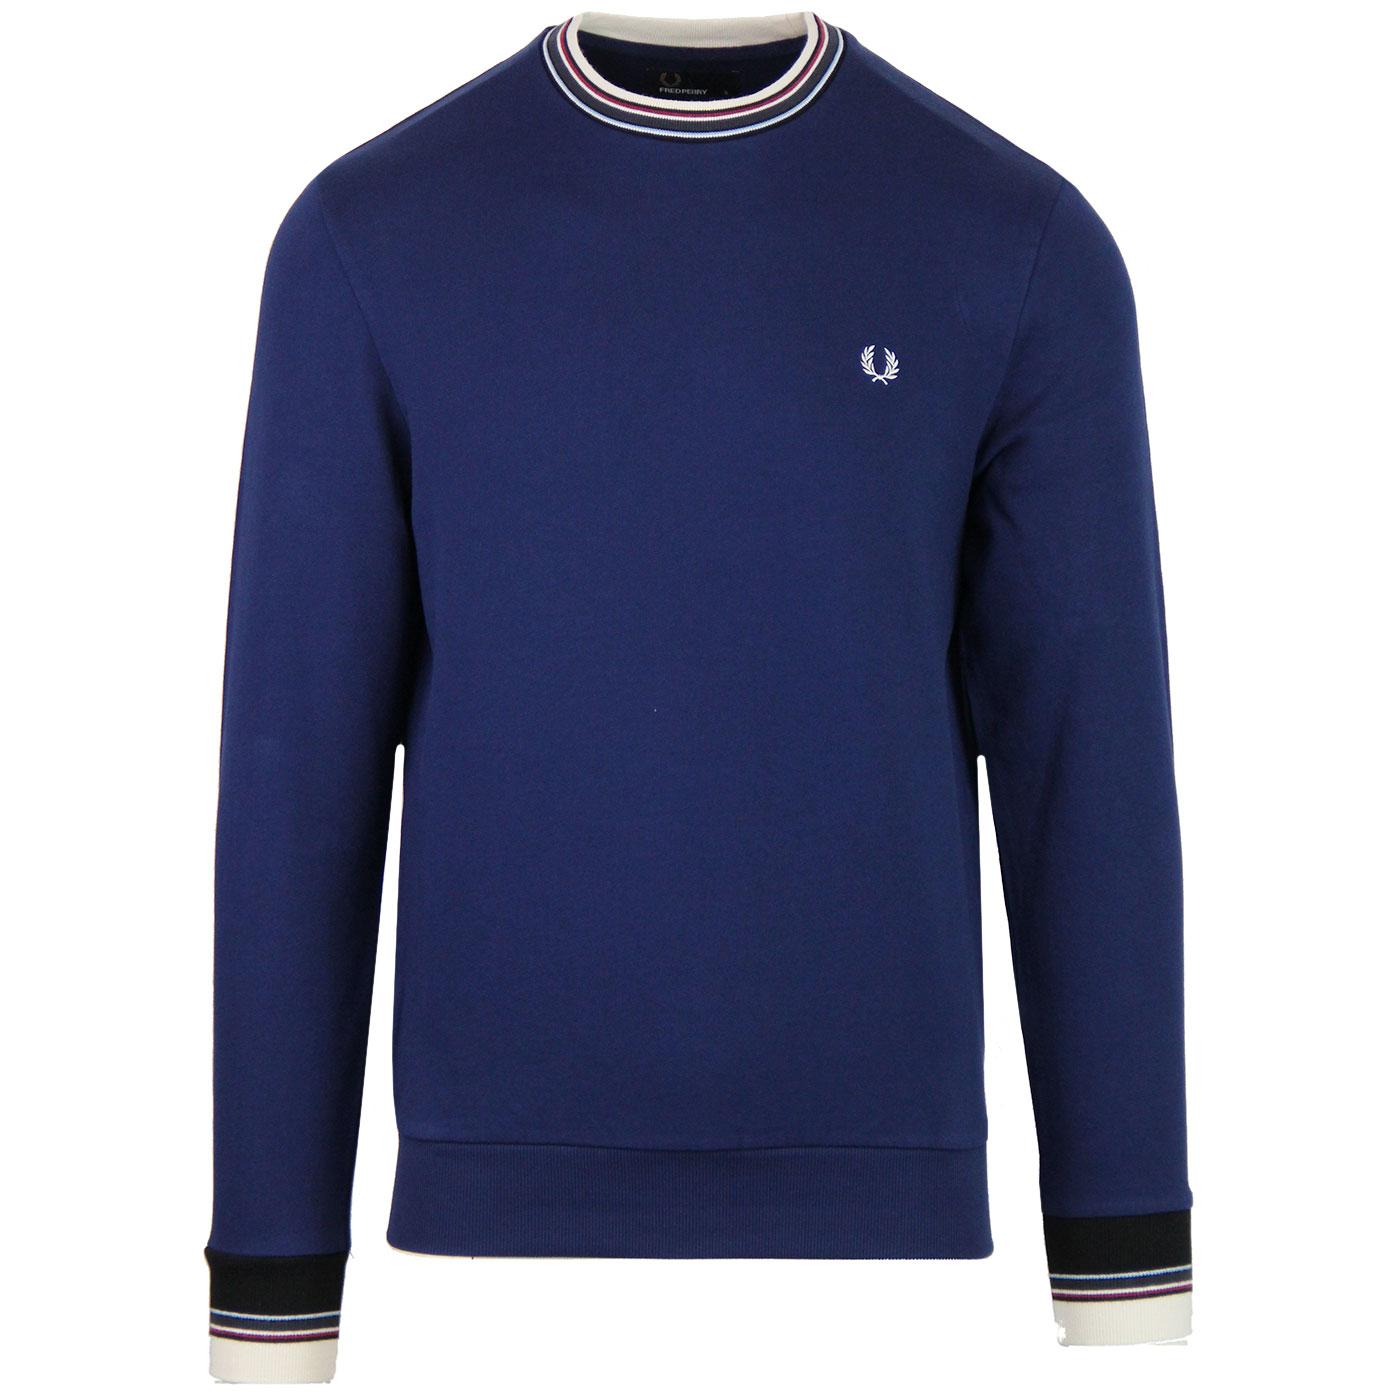 Fred perry retro